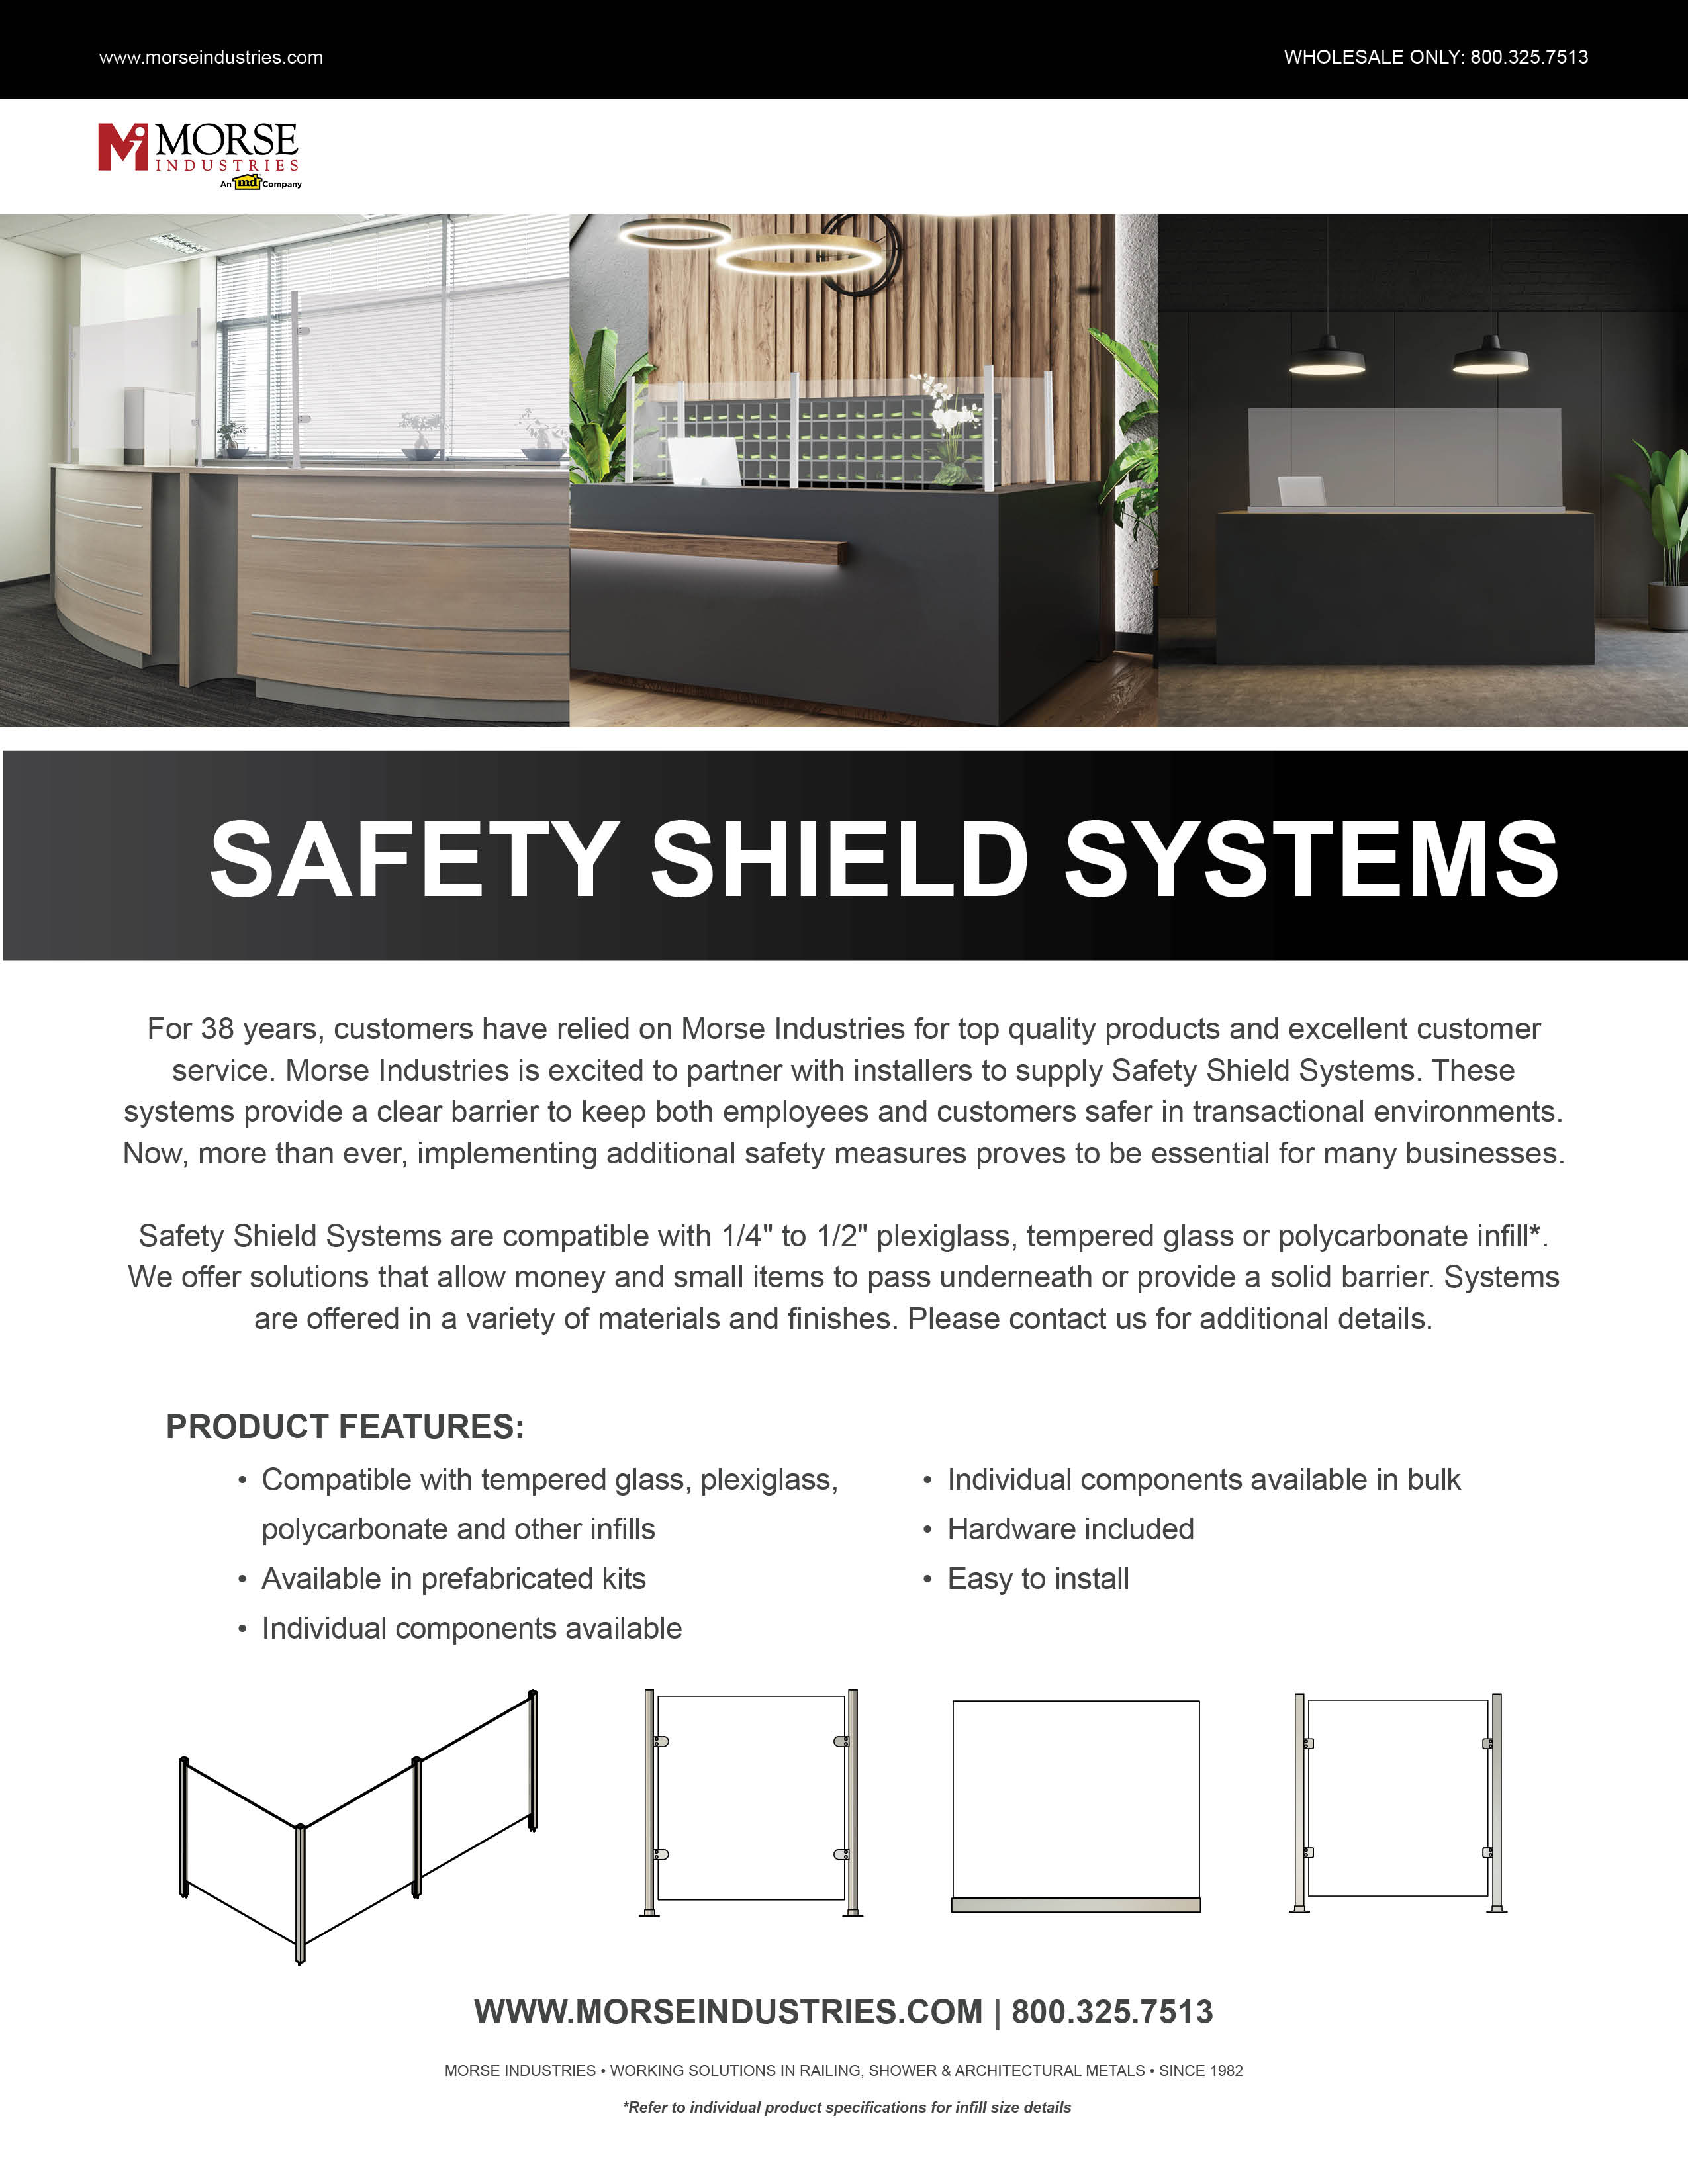 Safety Shield Systems